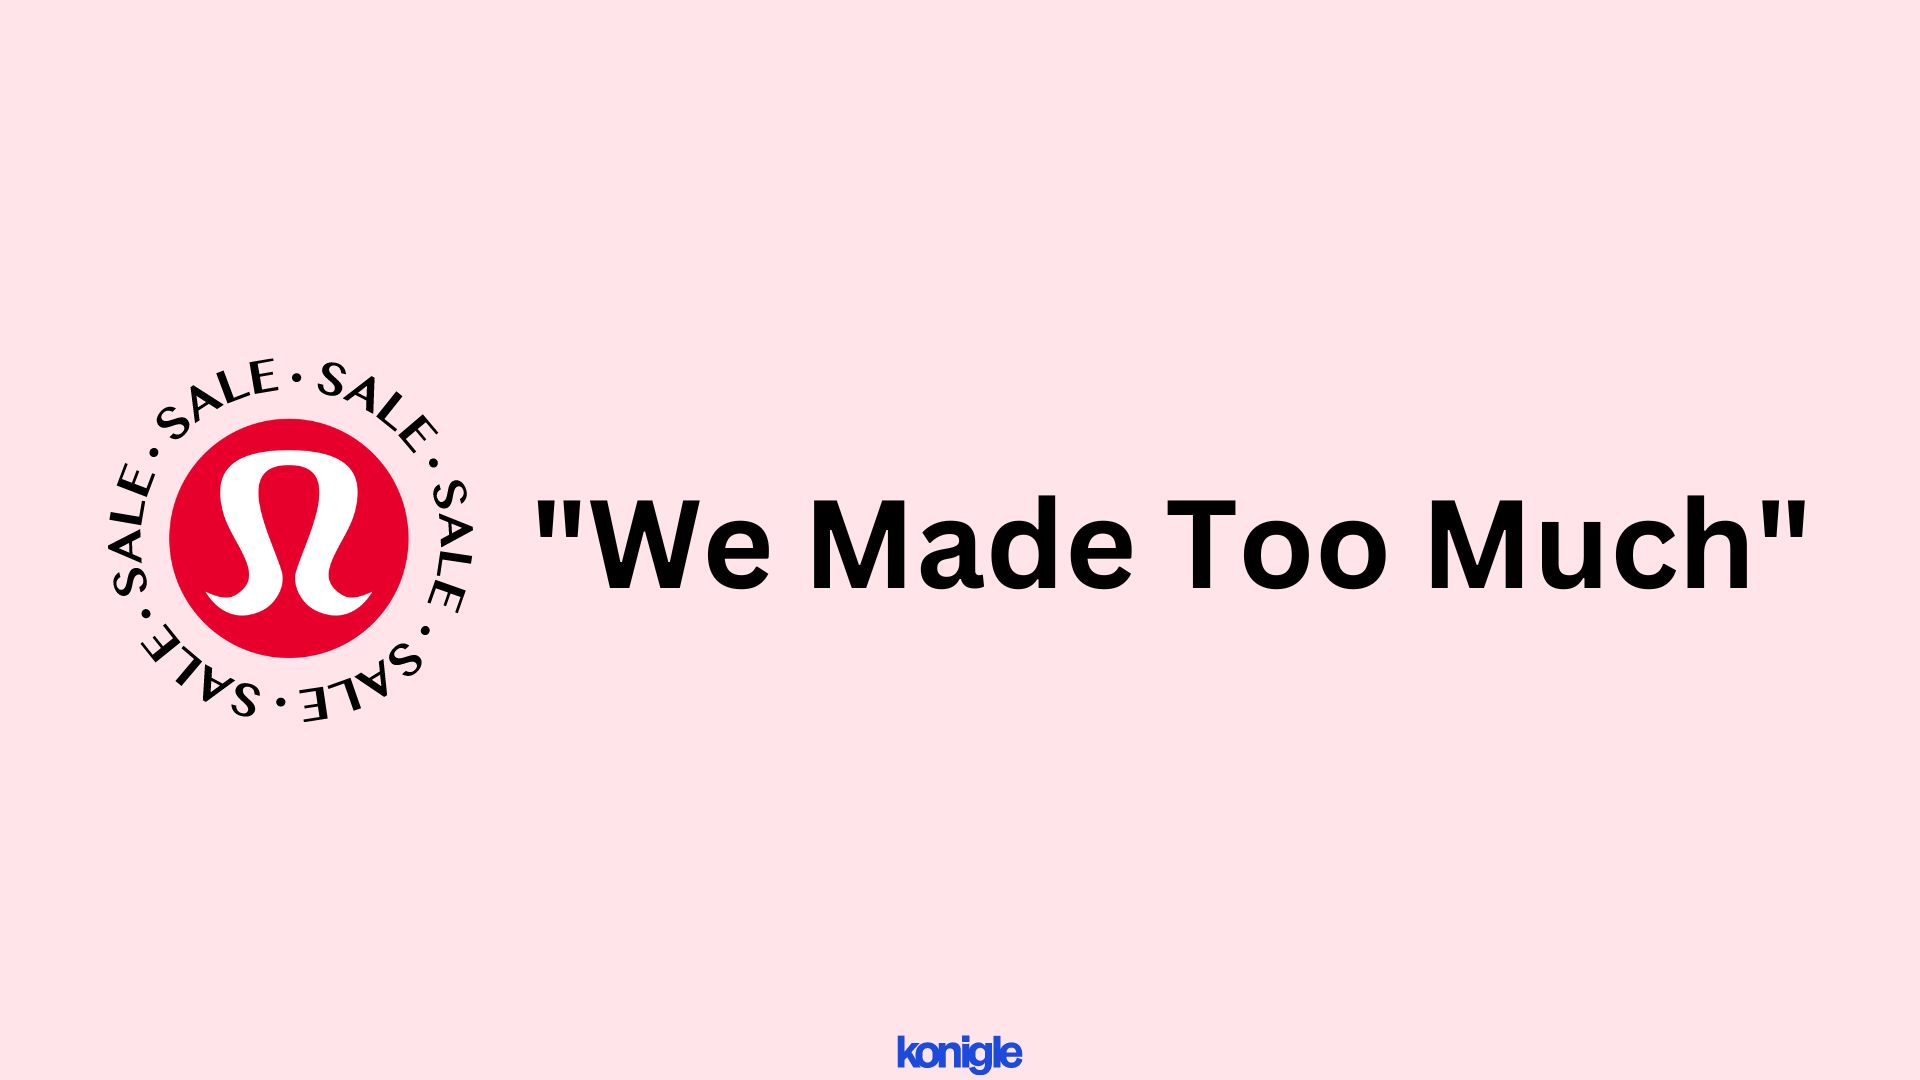 Lululemon “We Made Too Much" - On Sale & Deals